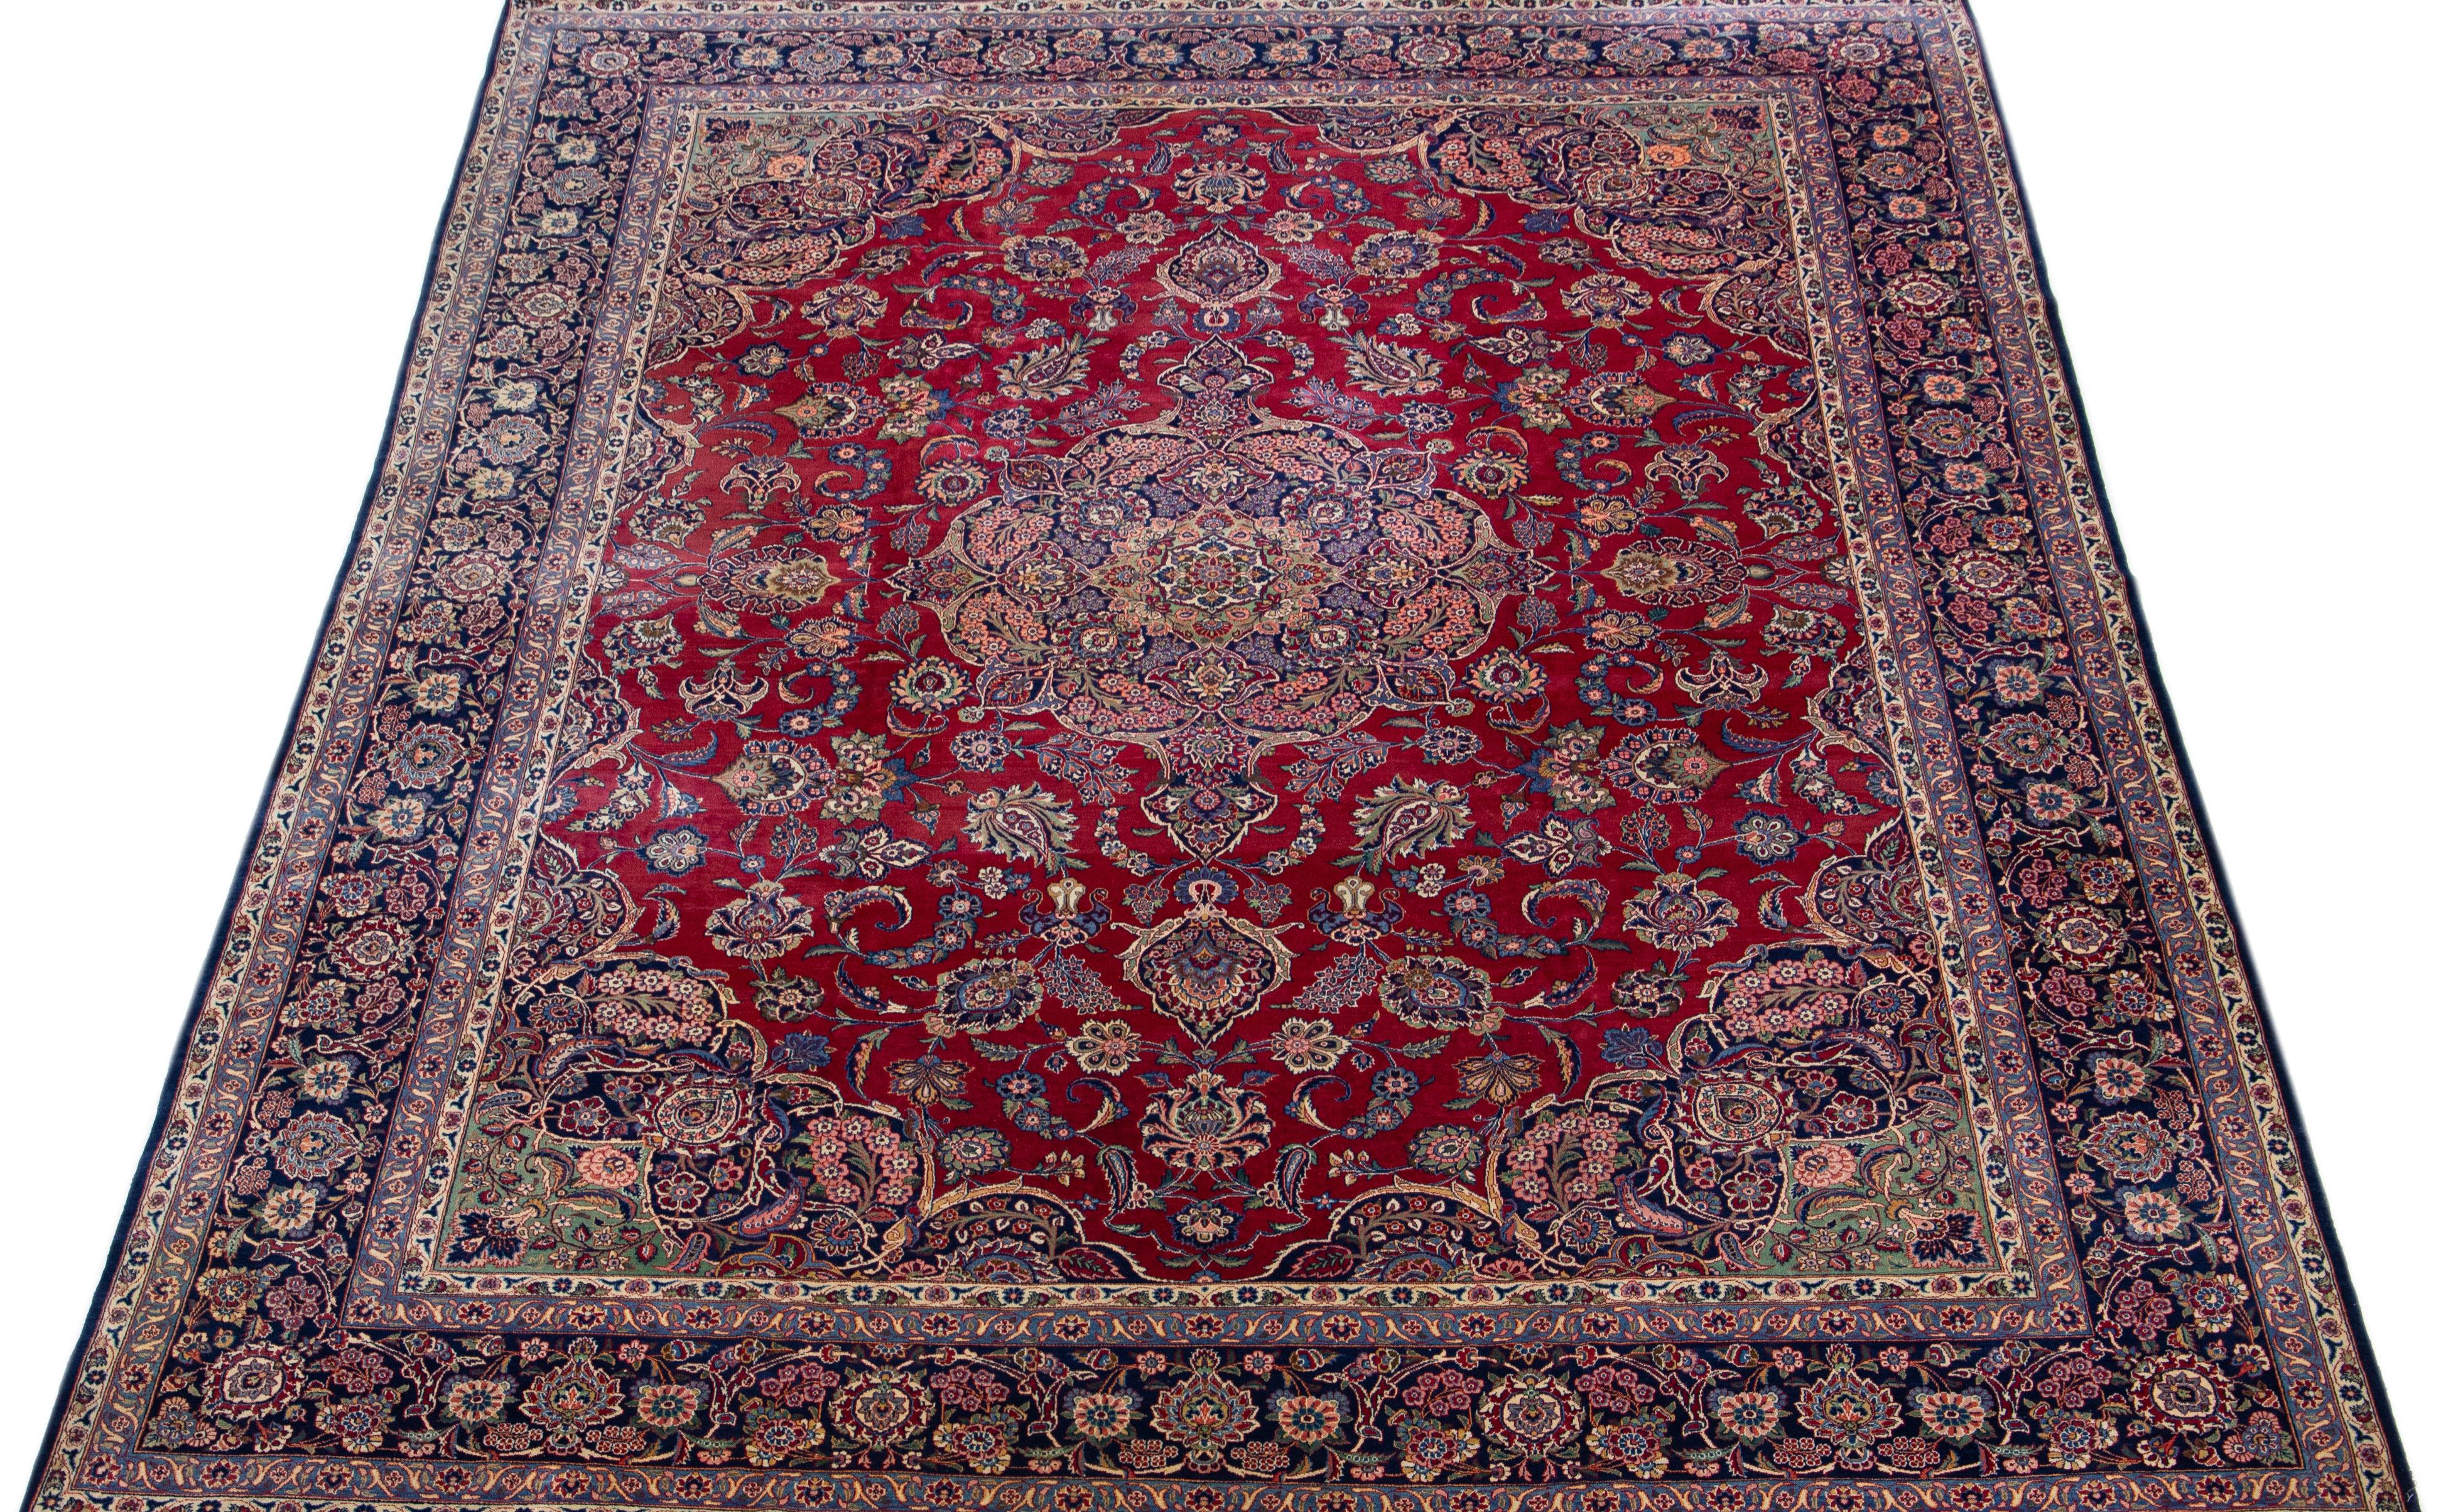 Beautiful Antique Kashan hand-knotted wool rug with a red color field. This Persian rug has a blue designed frame with accents in a gorgeous classic floral design. 

This rug measures: 10'6